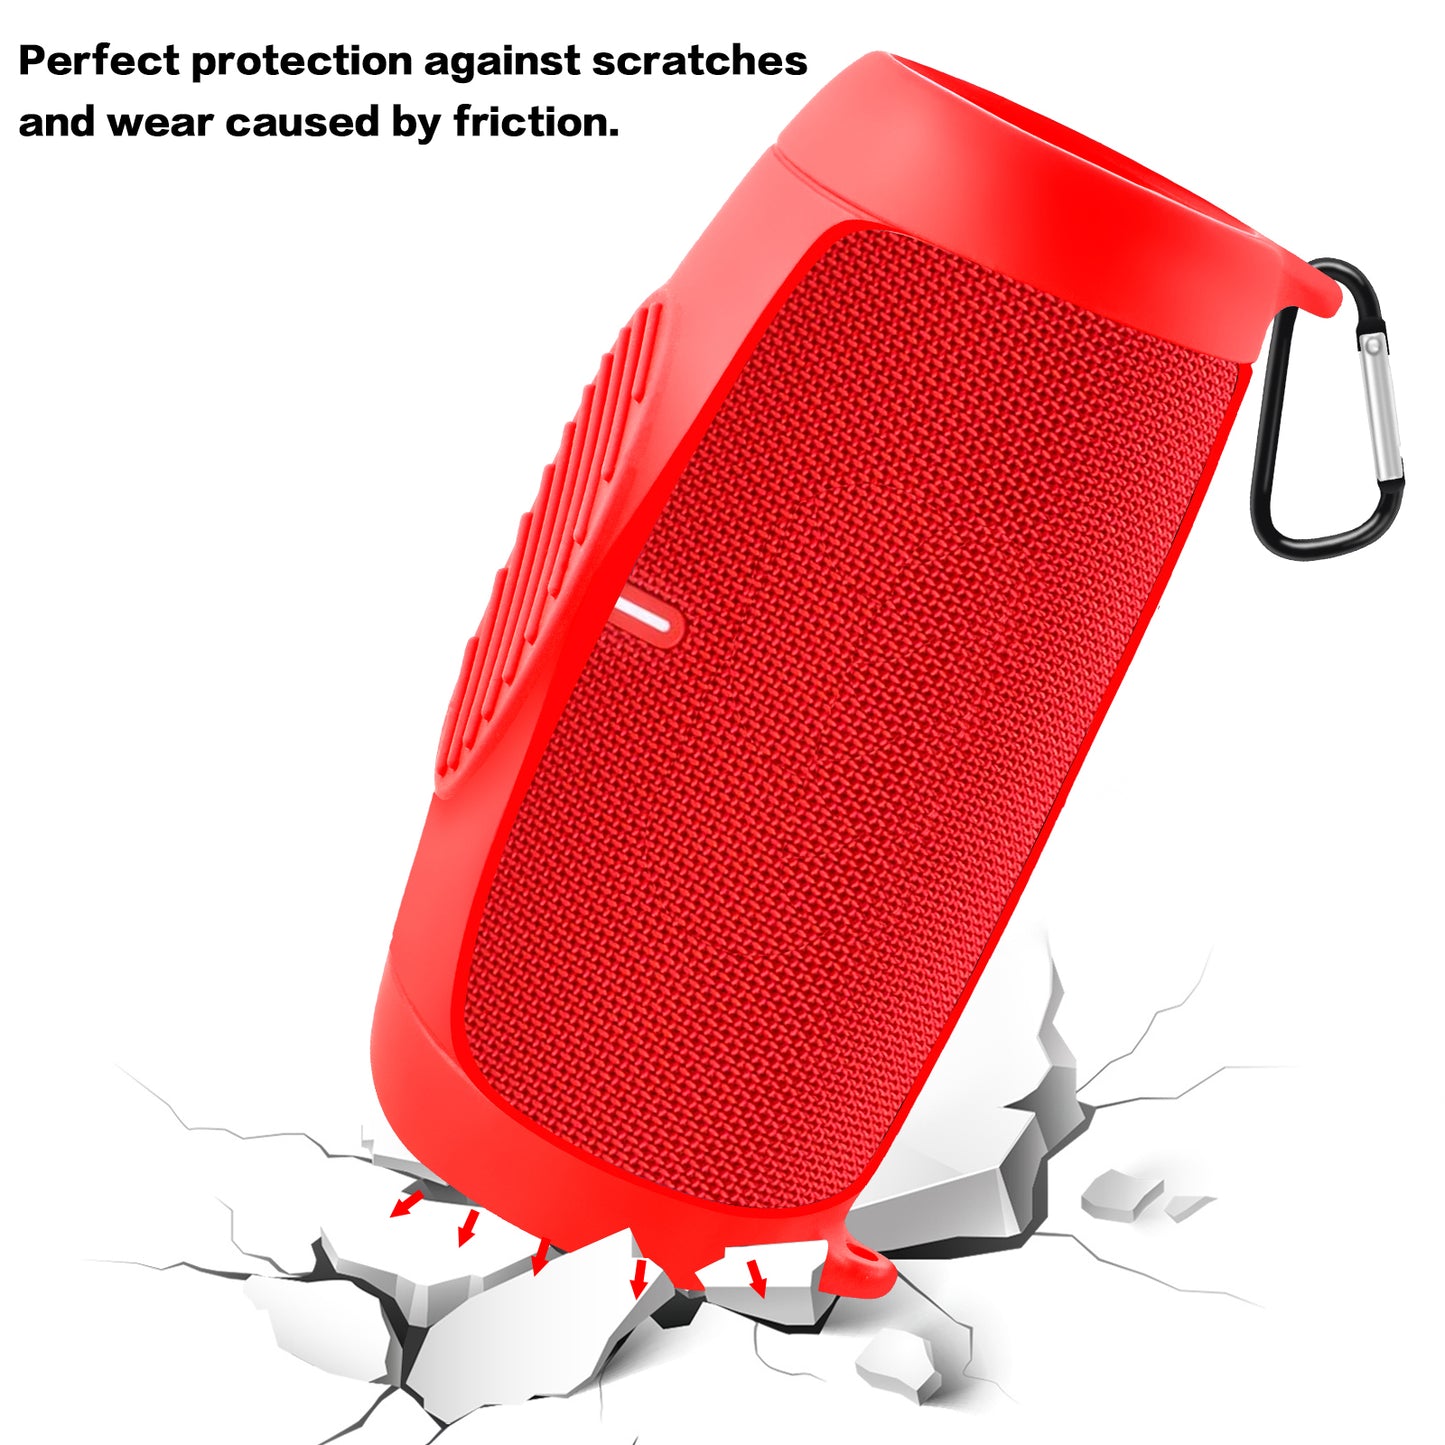 Silicone Case Cover for JBL Charge 5 Portable Bluetooth Speaker, Travel Gel Soft Skin,Waterproof Rubber Carrying Pouch with Strap(Red)